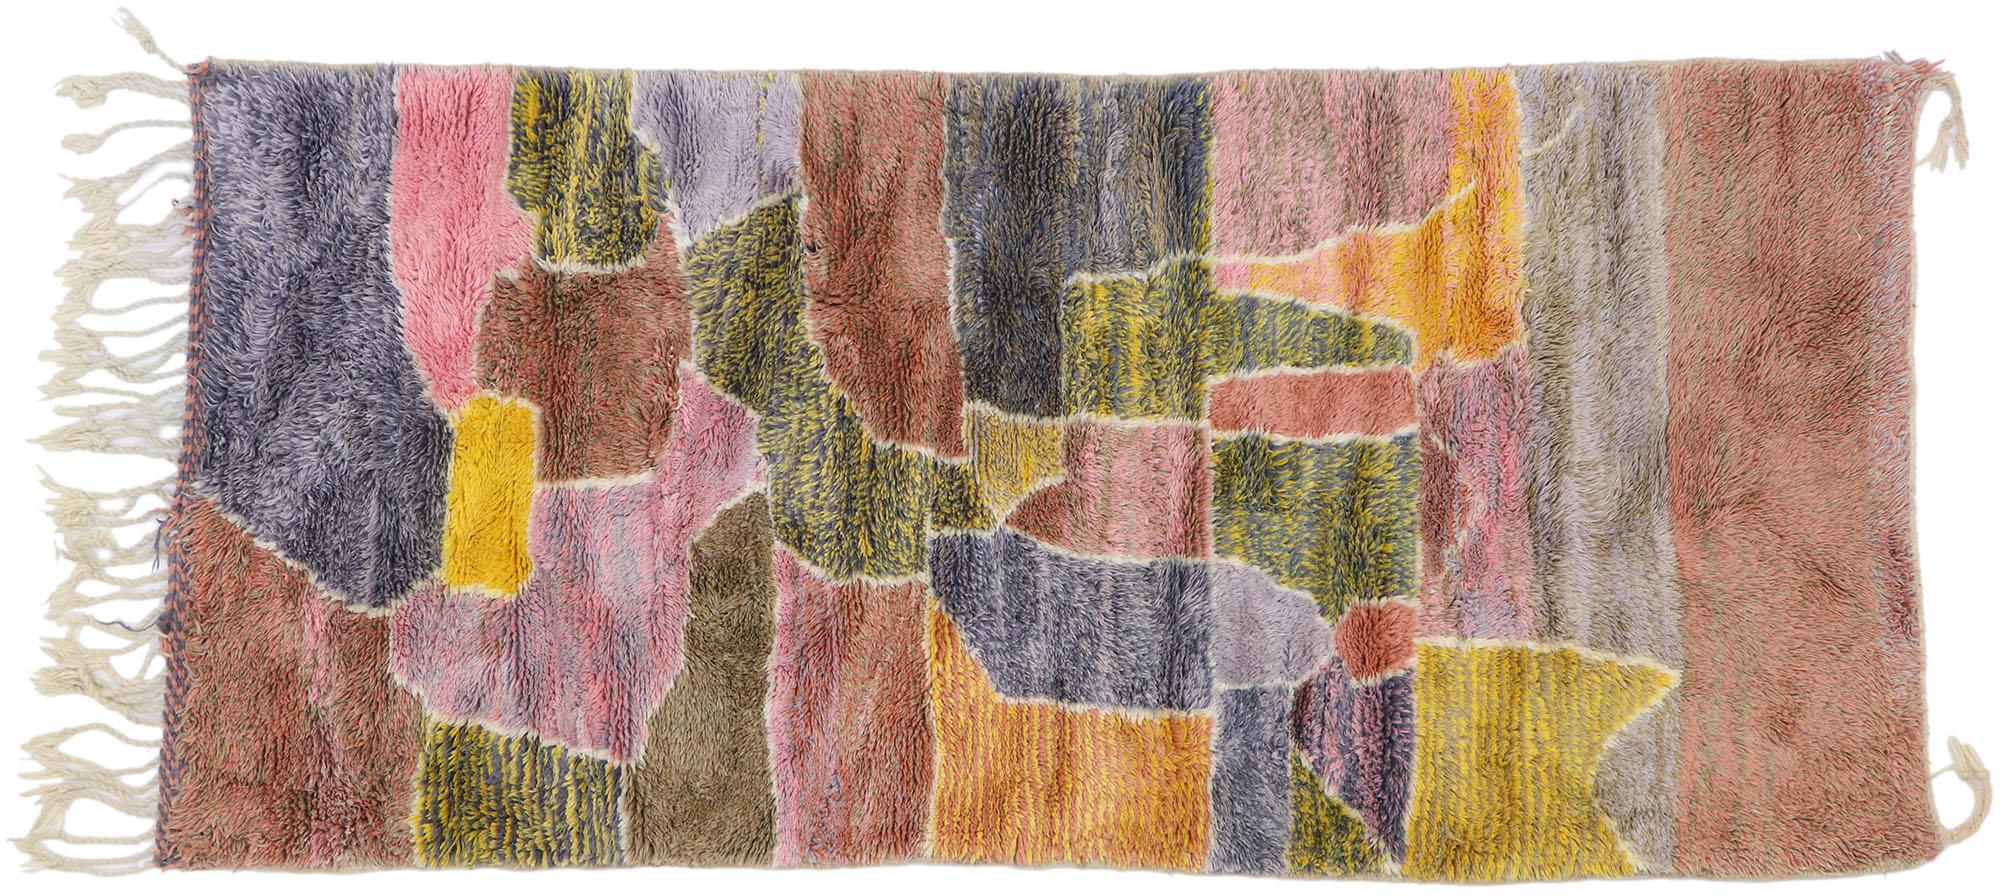 New Colorful Abstract Moroccan Rug with Soft Earth-Tone Colors For Sale 2